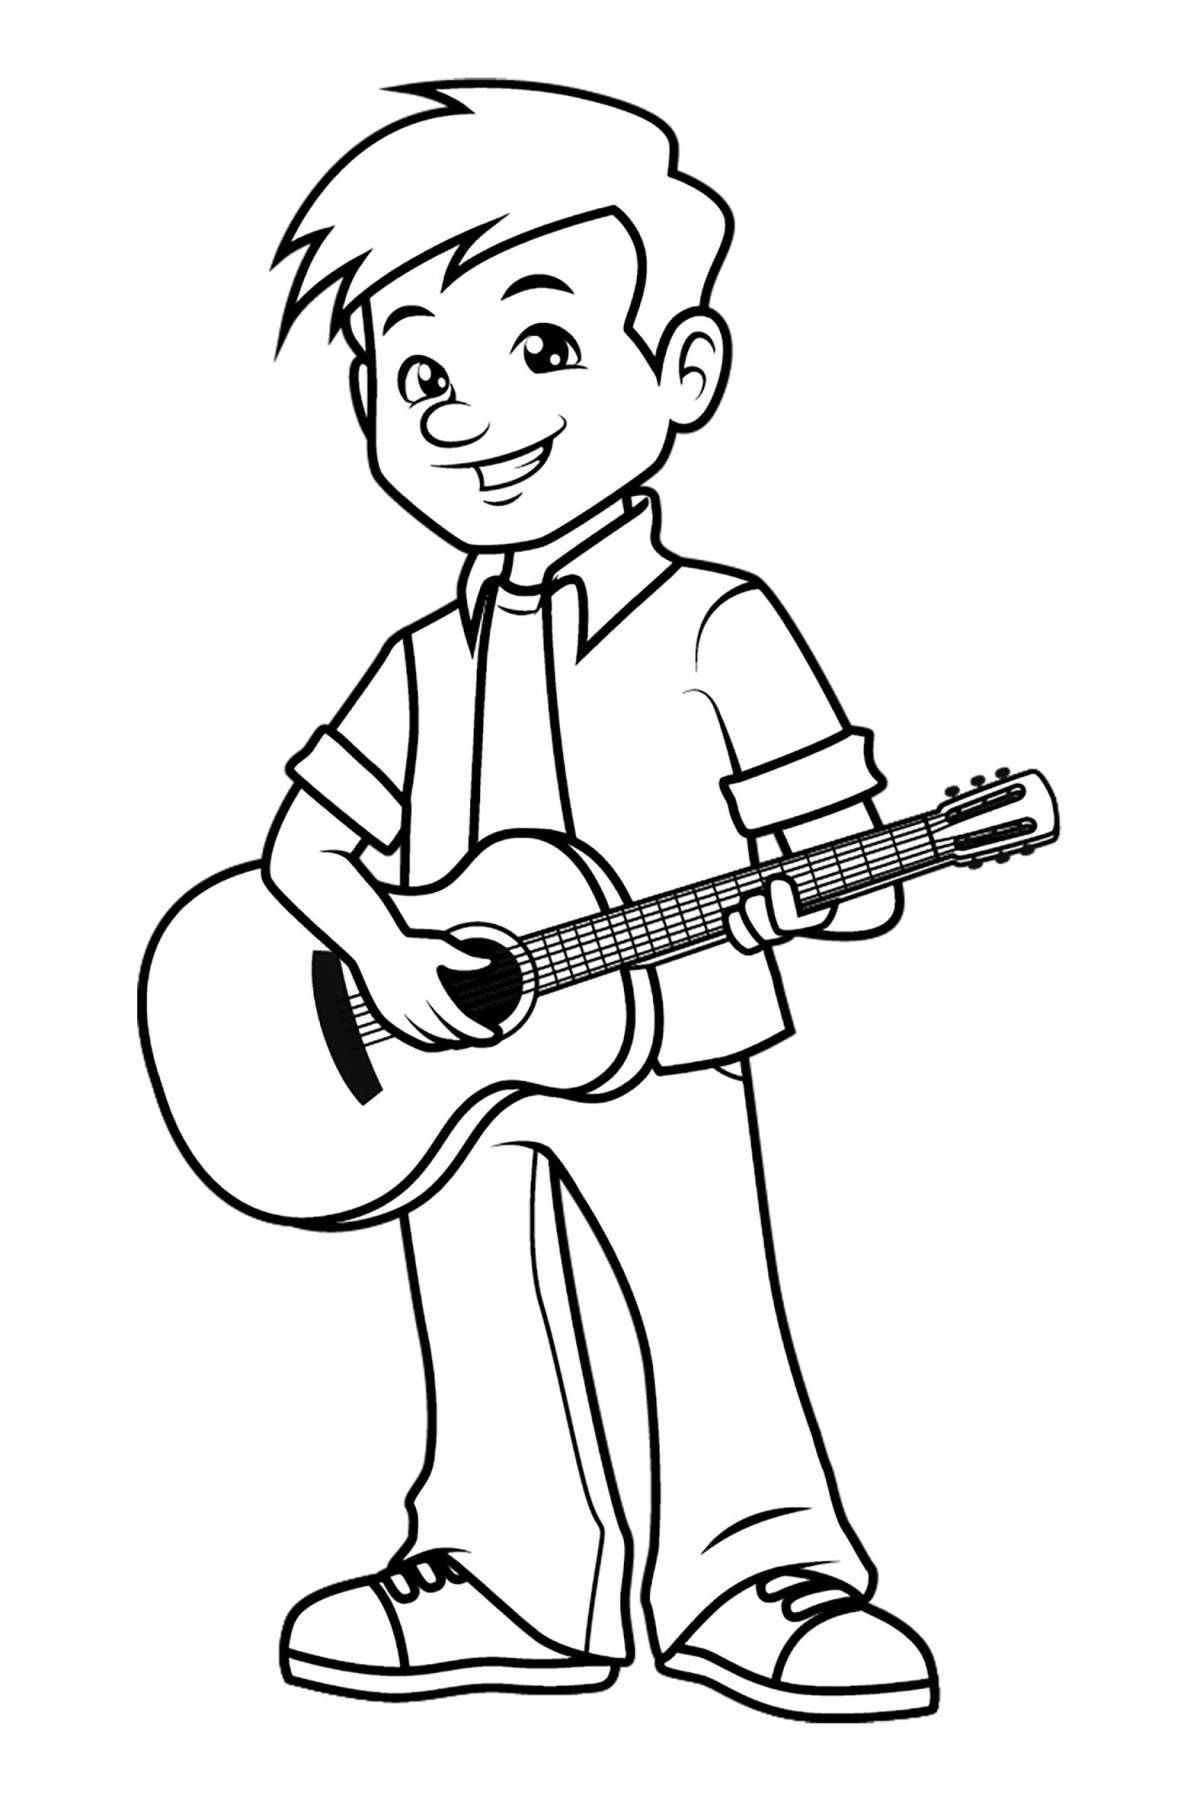 Glowing singer coloring page for kids